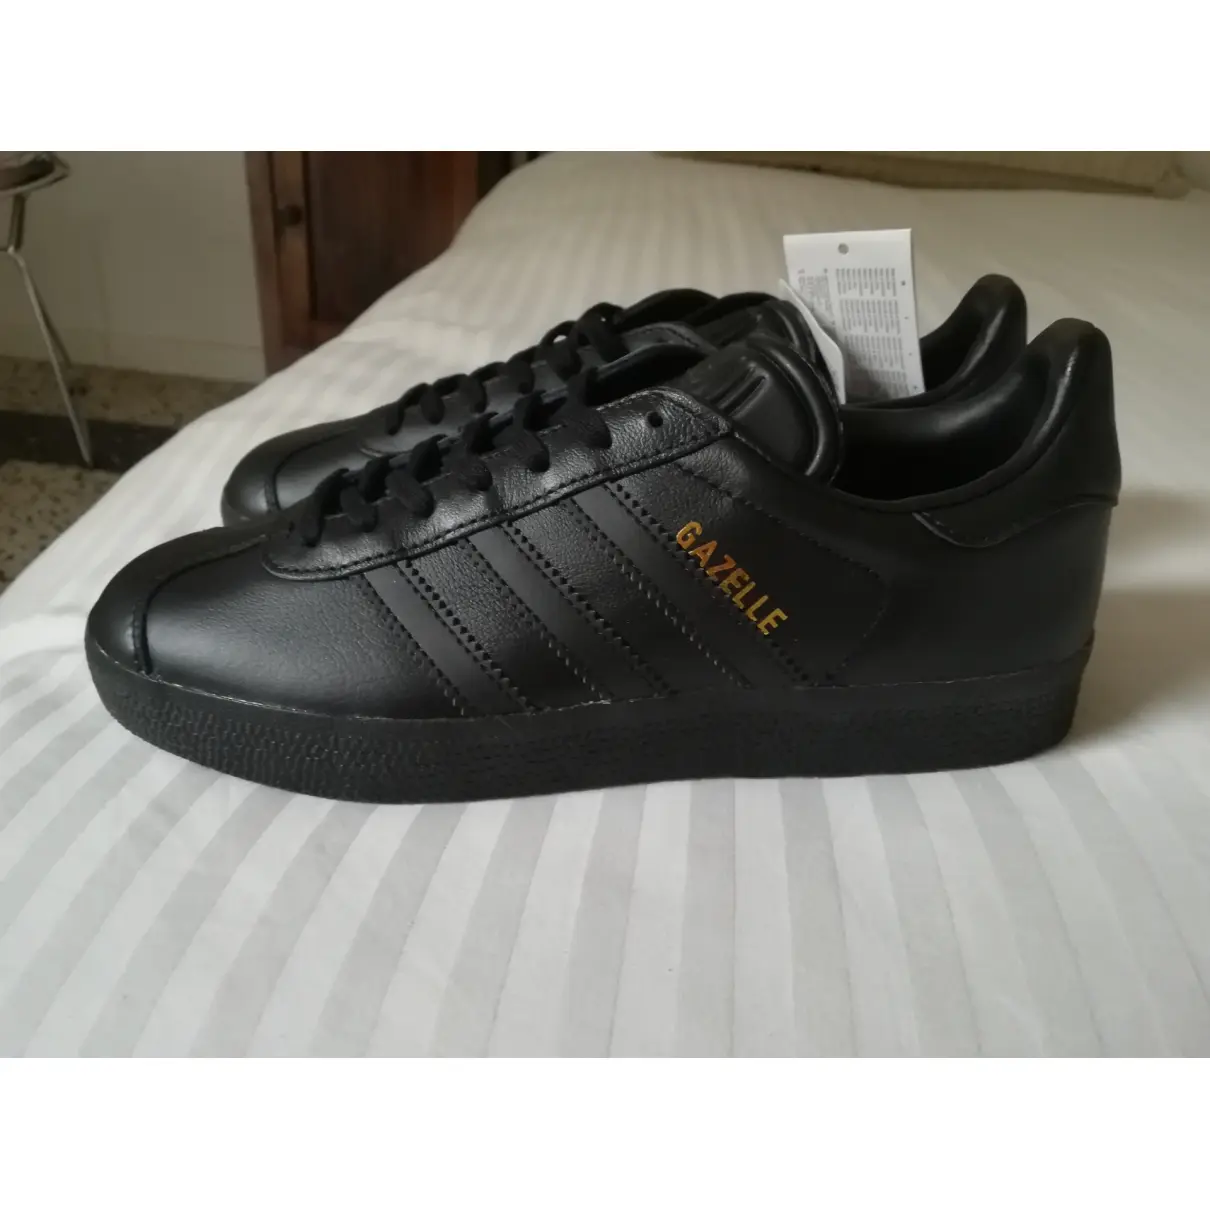 Buy Adidas Gazelle leather trainers online